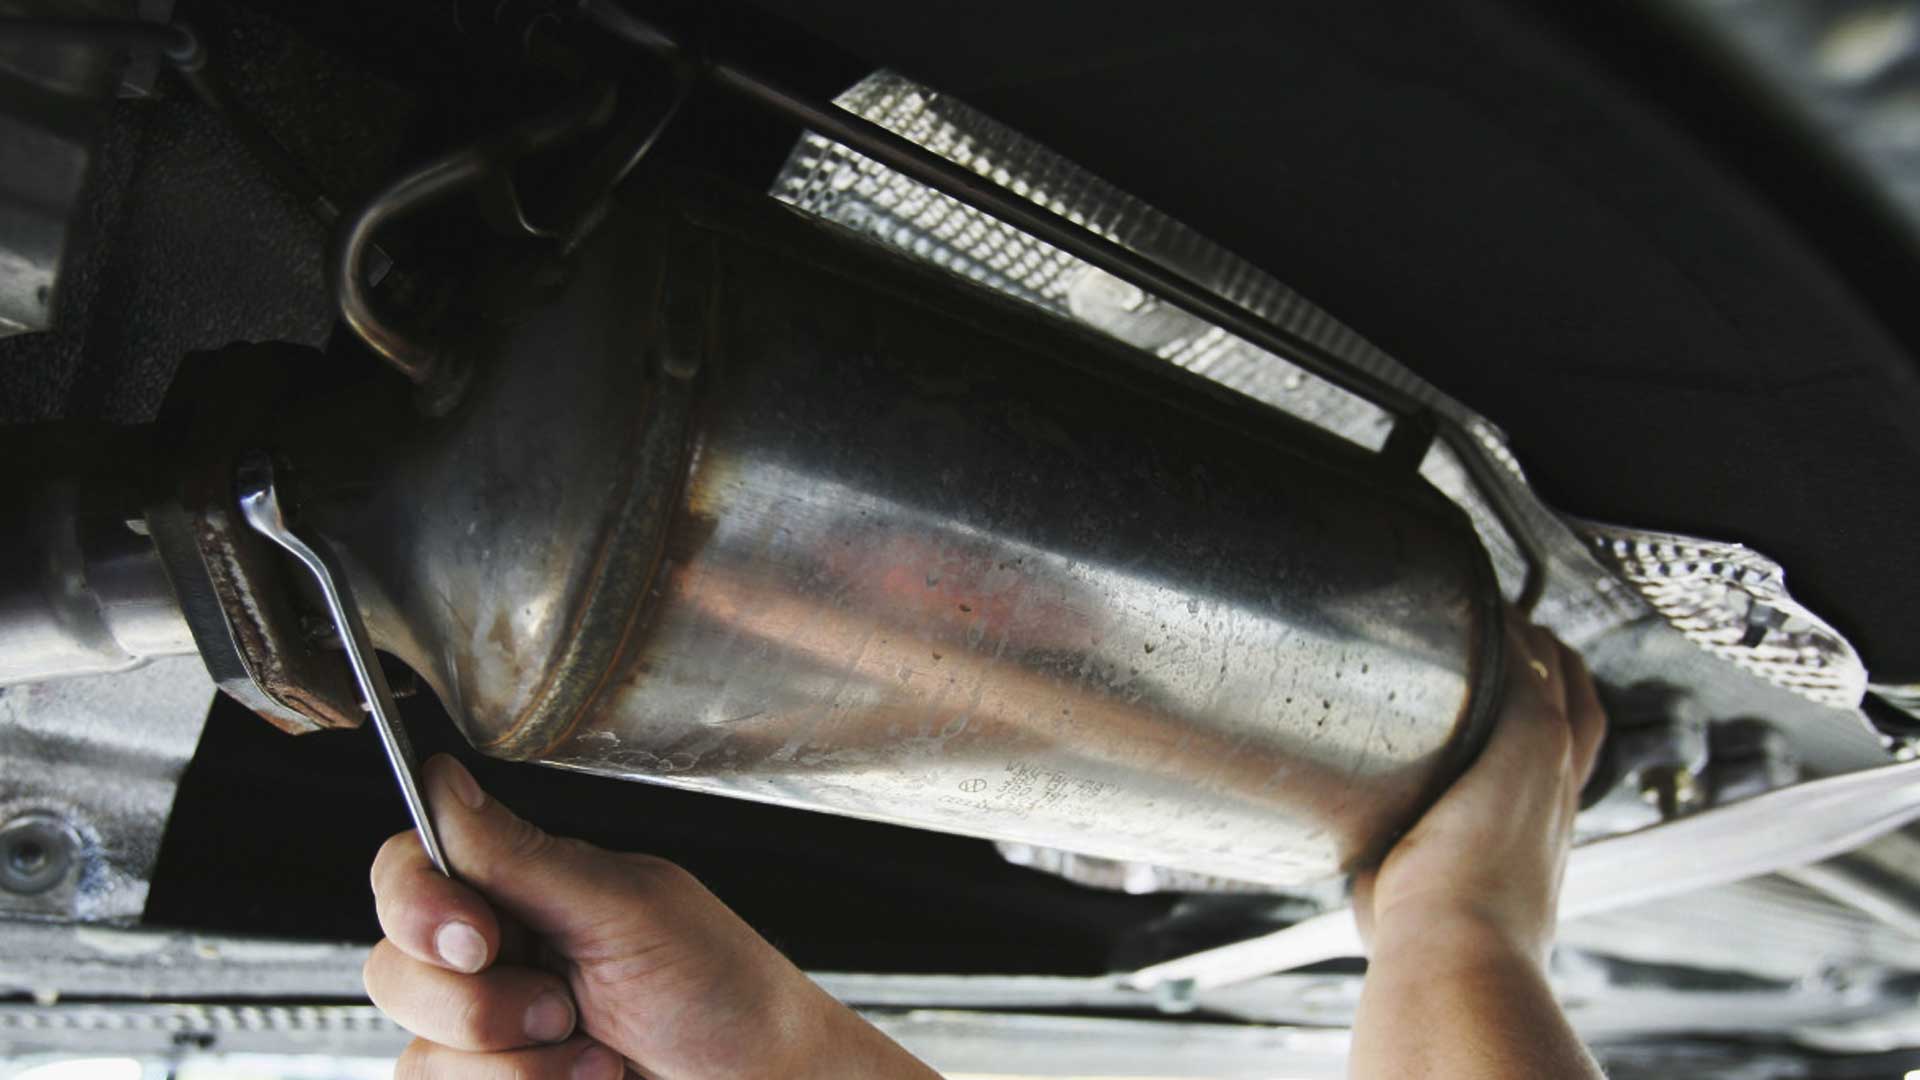 dpf removal cost